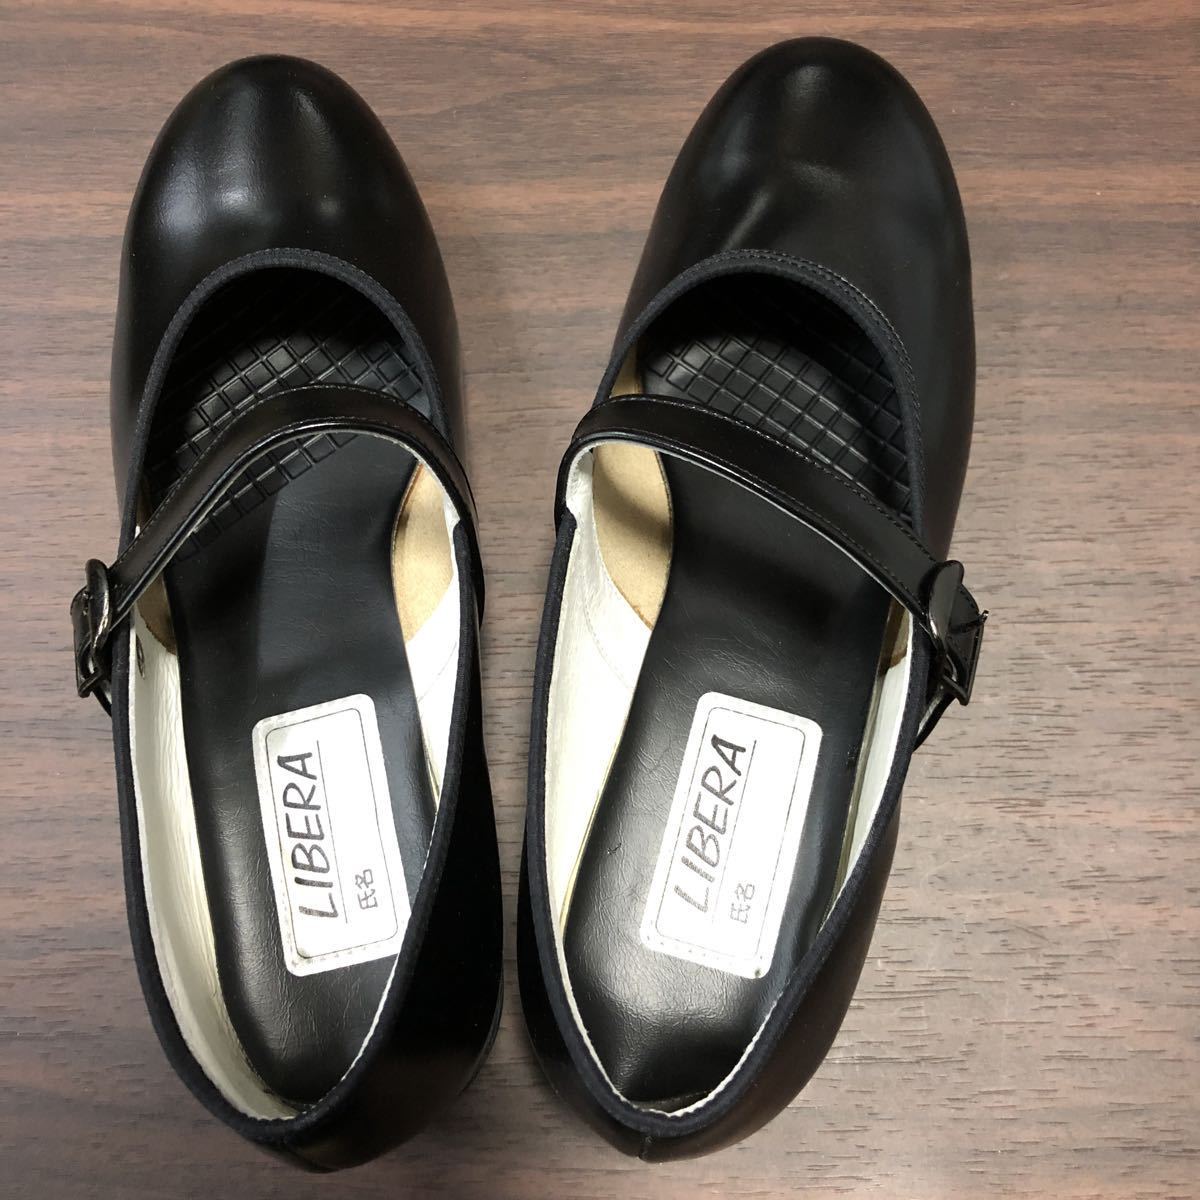  woman student leather shoes real leather 23.5cm 5800 jpy. goods .3 pair .7000 jpy . Asahi product 